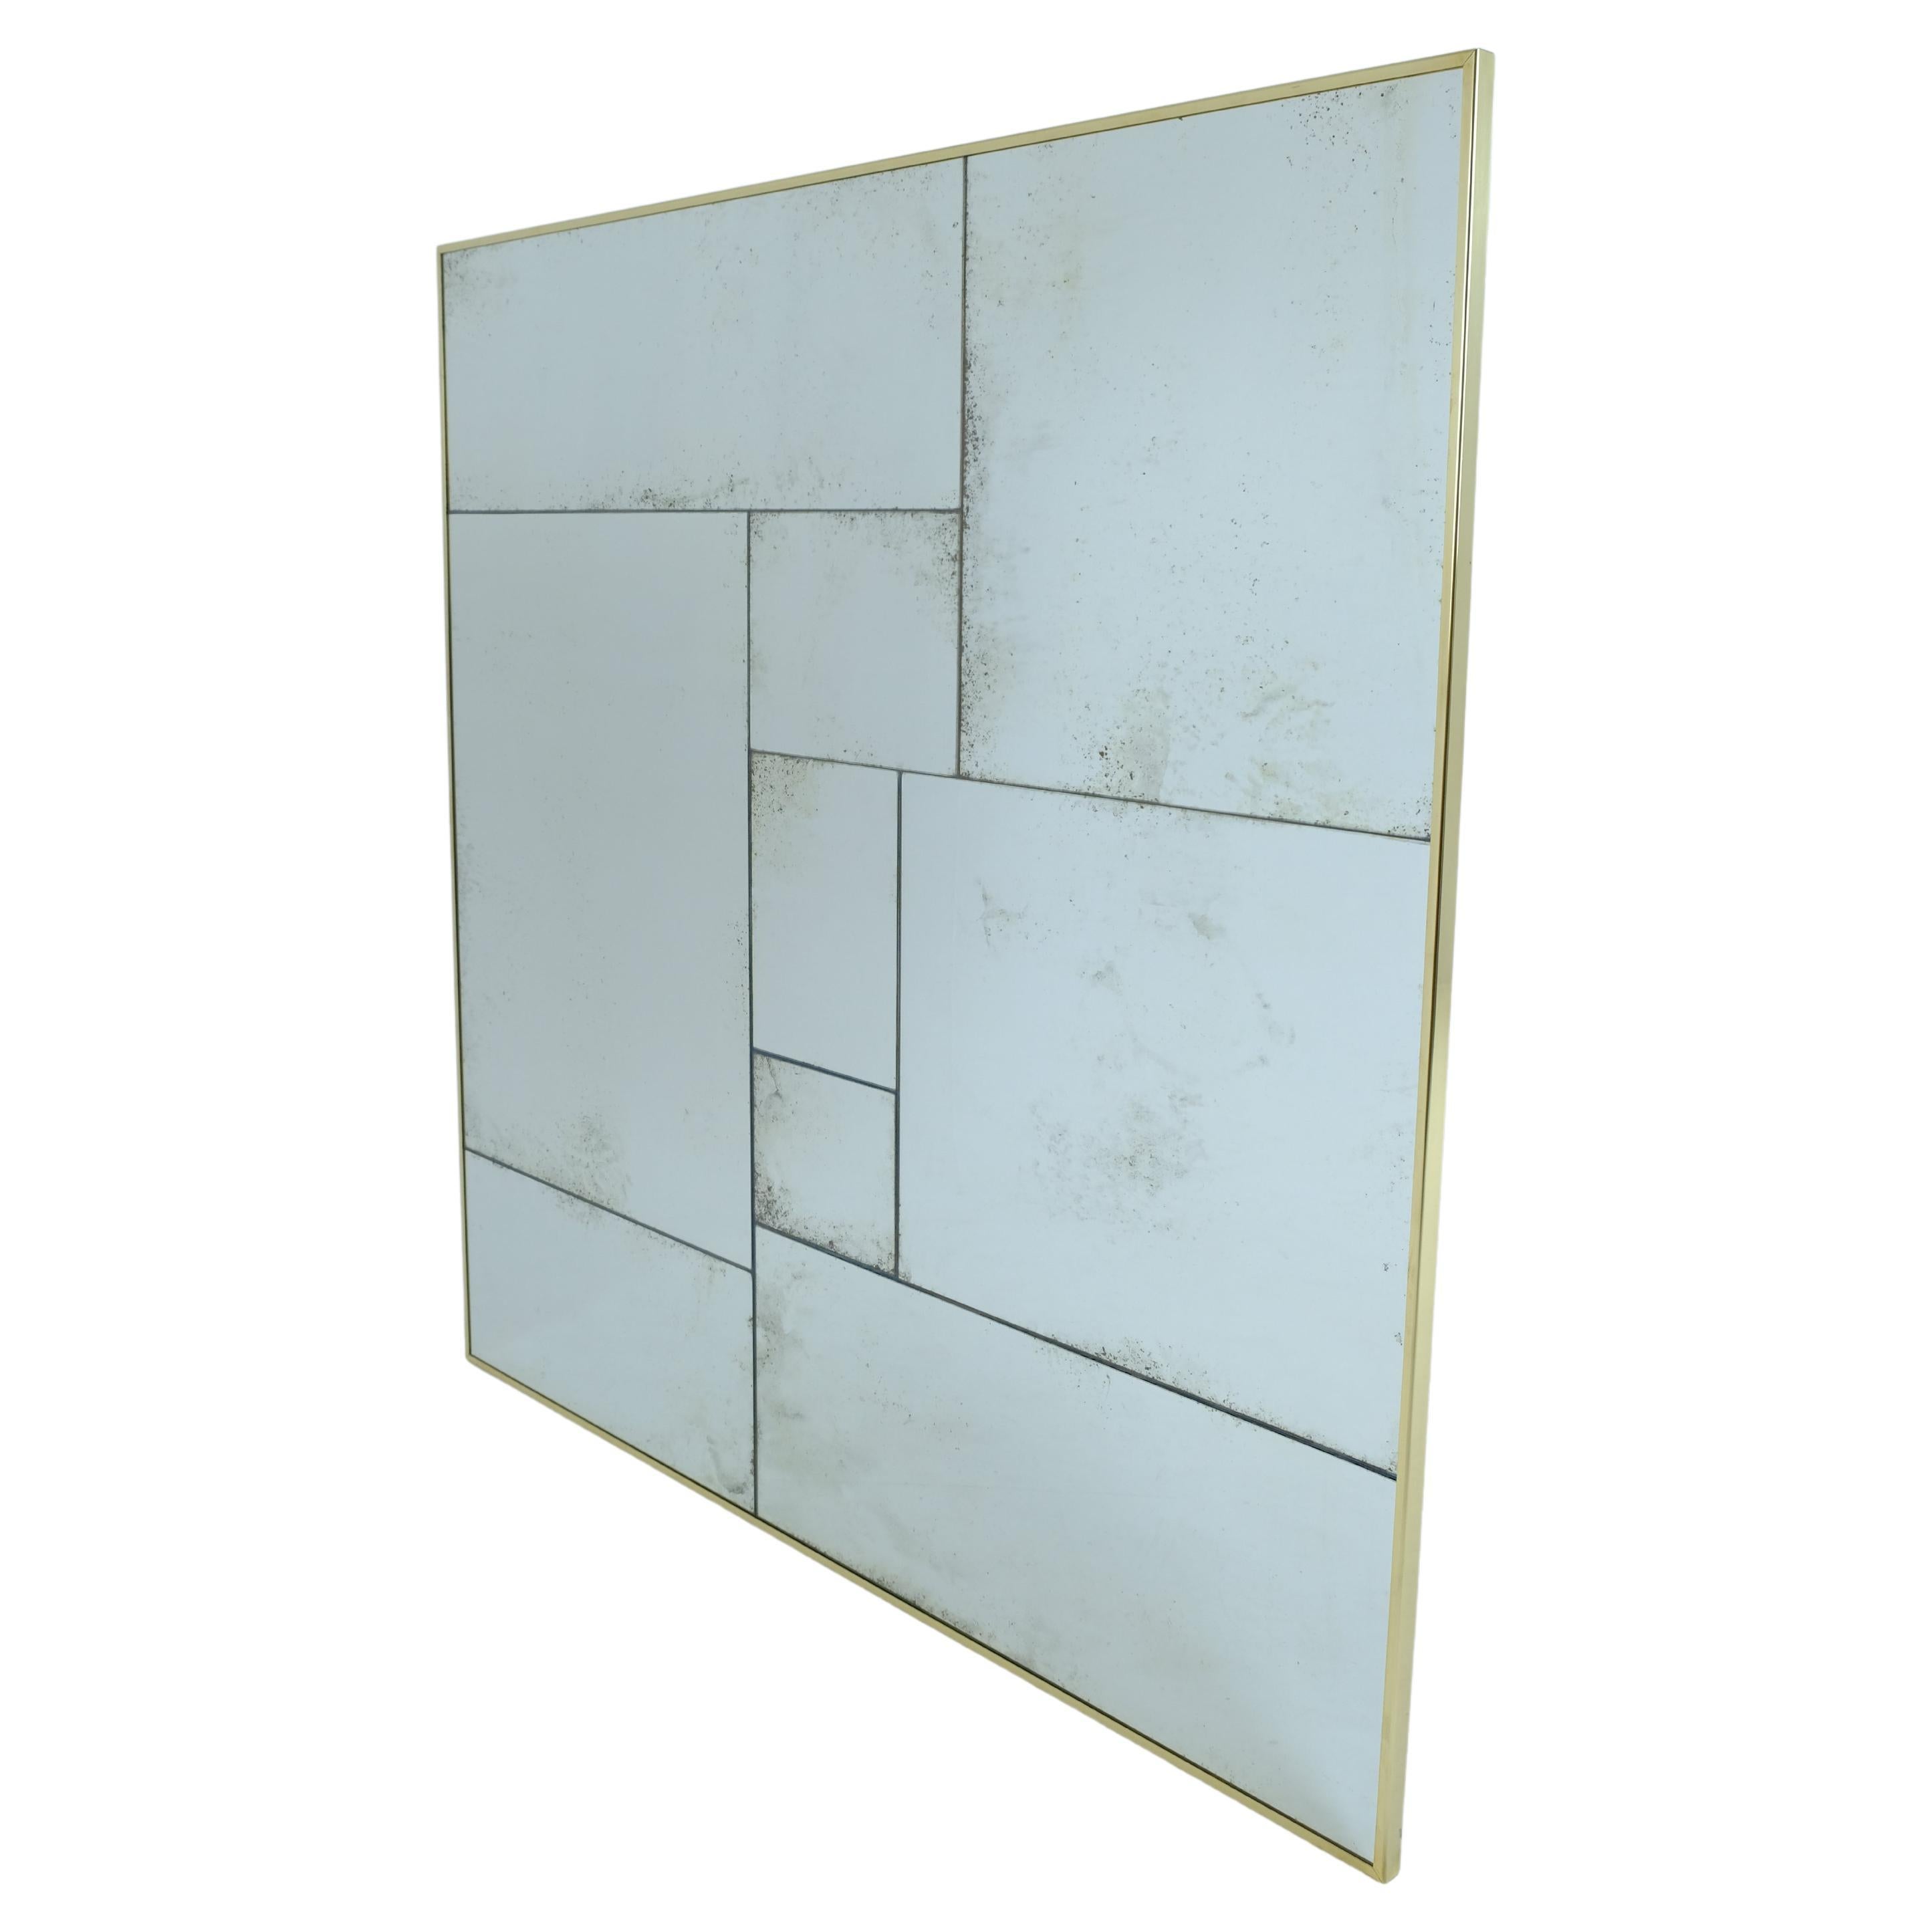 Industrial Custom-Made Artisanal Mirror Hand-Aged Authentic Brass Finish Frame L For Sale